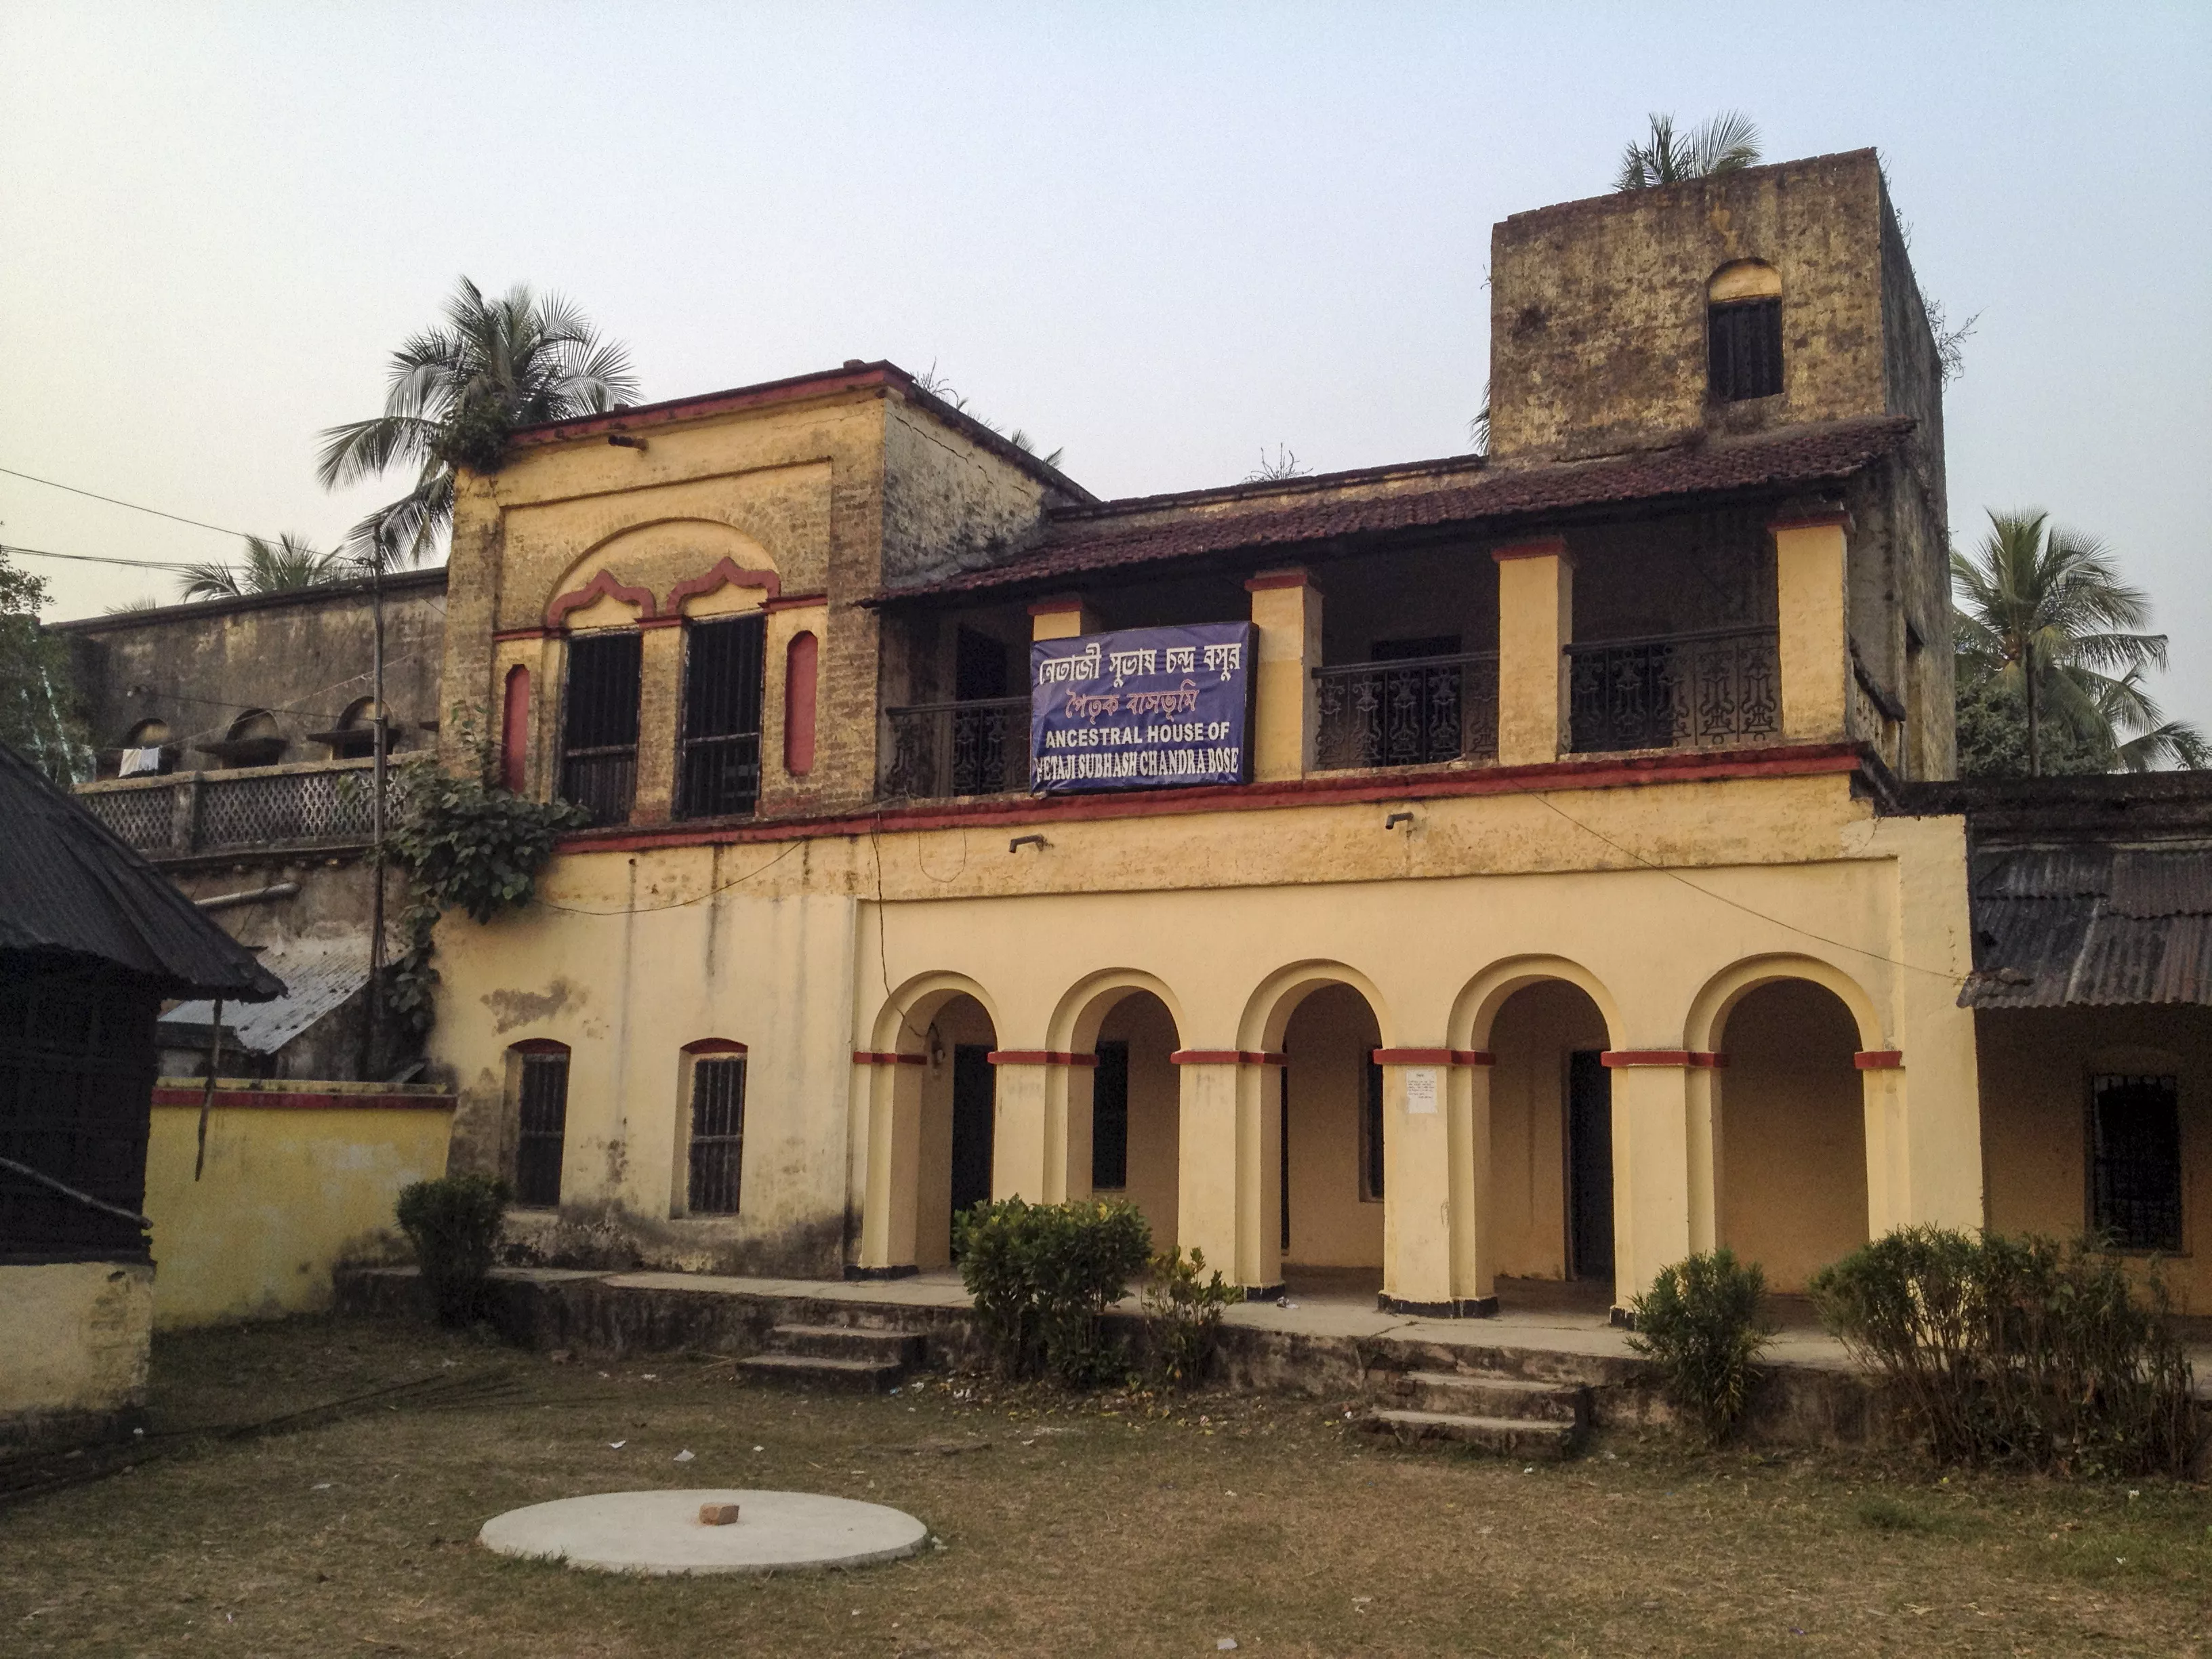 House of Netaji Subhash Chandra Bose in India, Central Asia | Museums - Rated 3.9